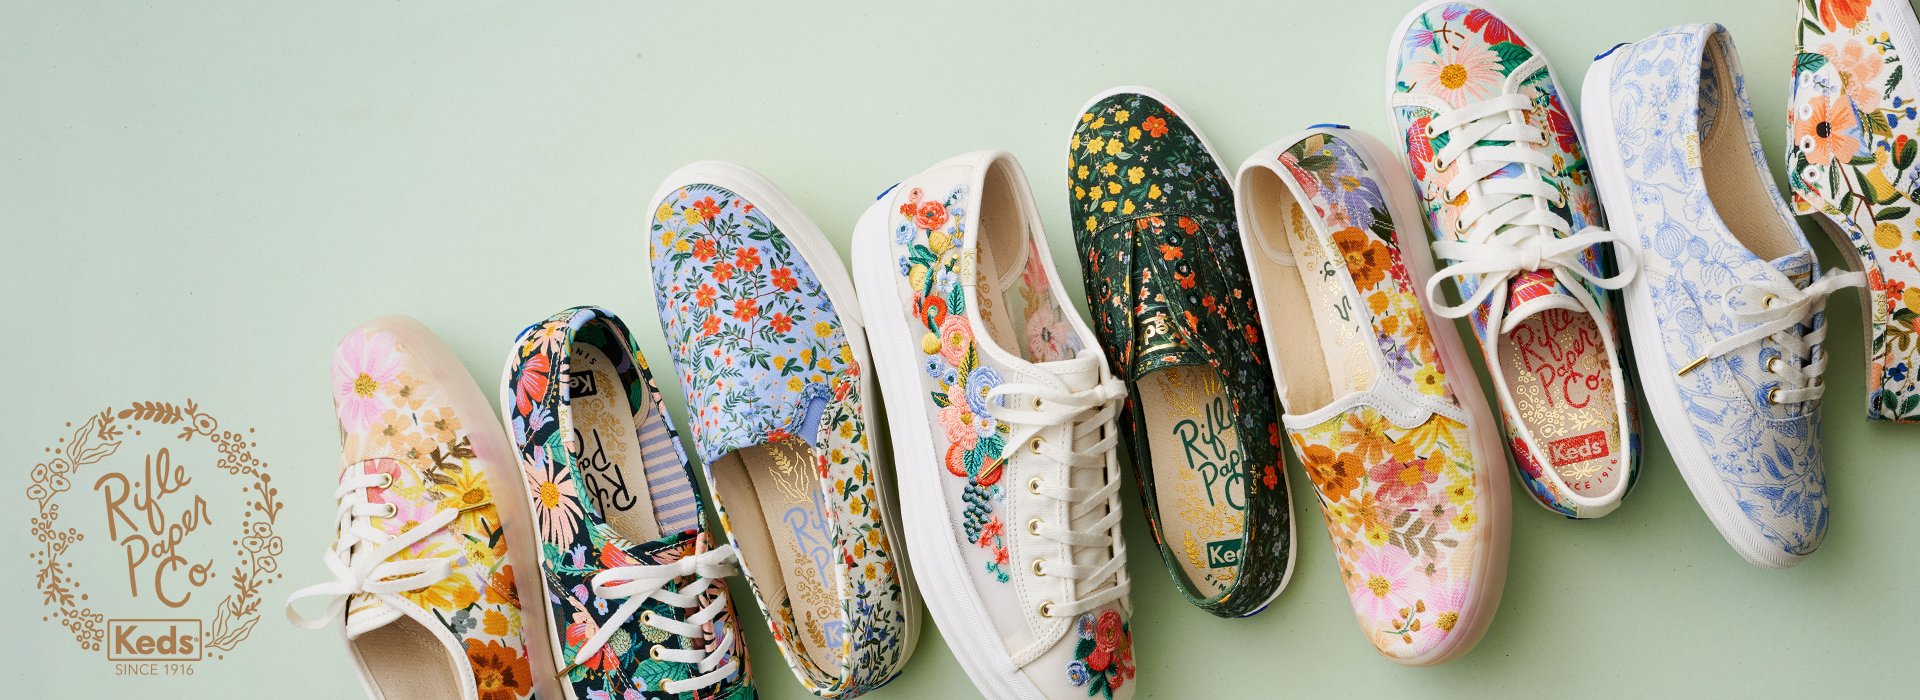 Rifle Paper Company plus Keds, since 1916 logo. Selection of shoes with flower prints from collection.